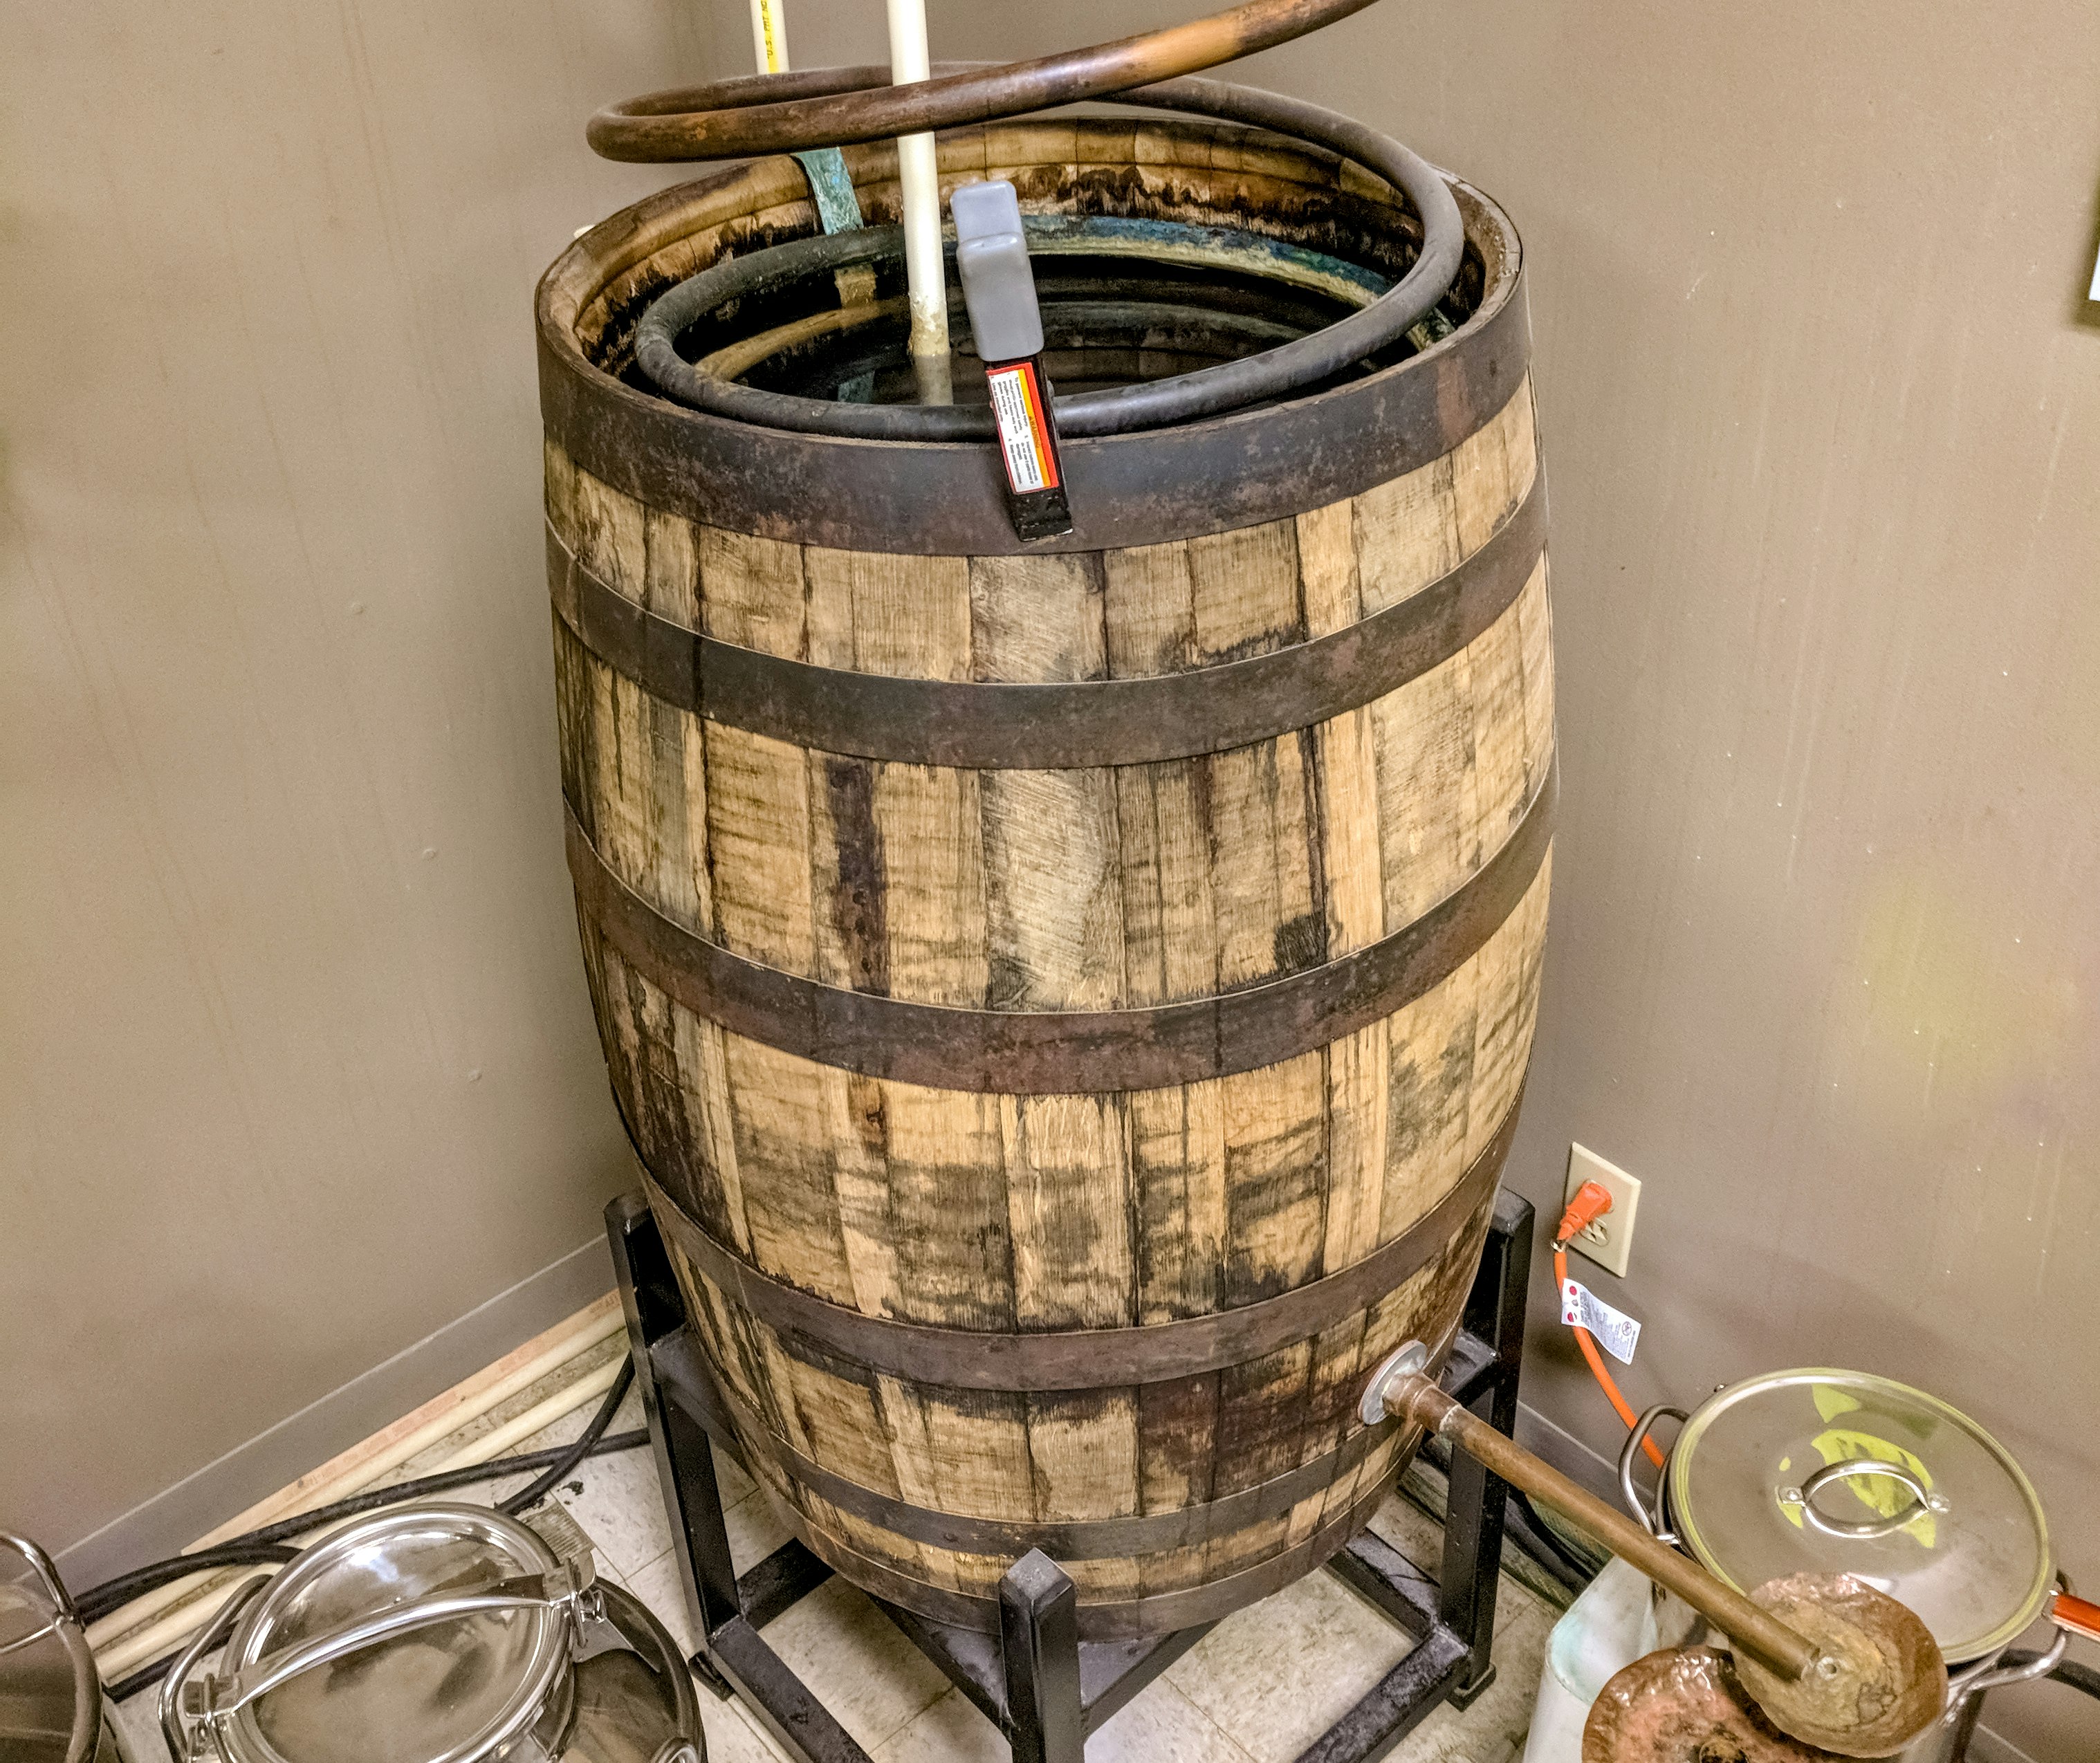 A large wooden barrel has a large wire copper coil inside of it. A long copper spout is attached to the bottom of the barrel. There are a collection of silver pots on the floor.